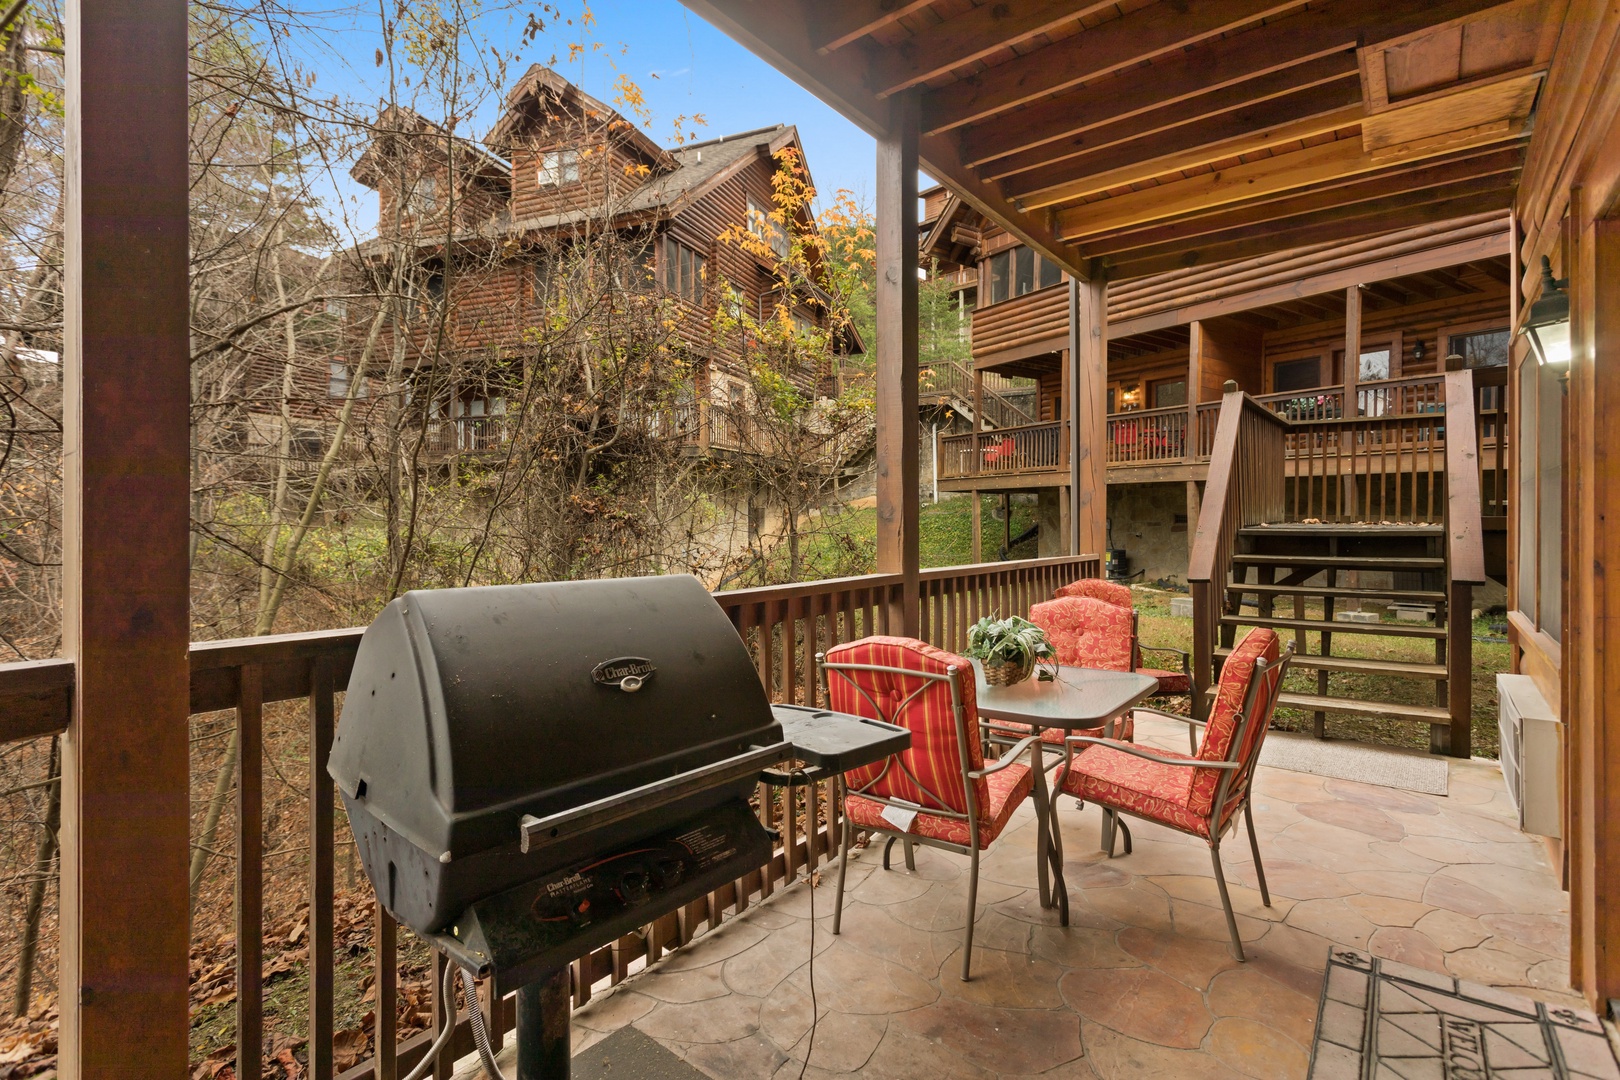 Patio with a grill and dining table at Starry Starry Night #725, a 2 bedroom cabin rental located in Pigeon Forge